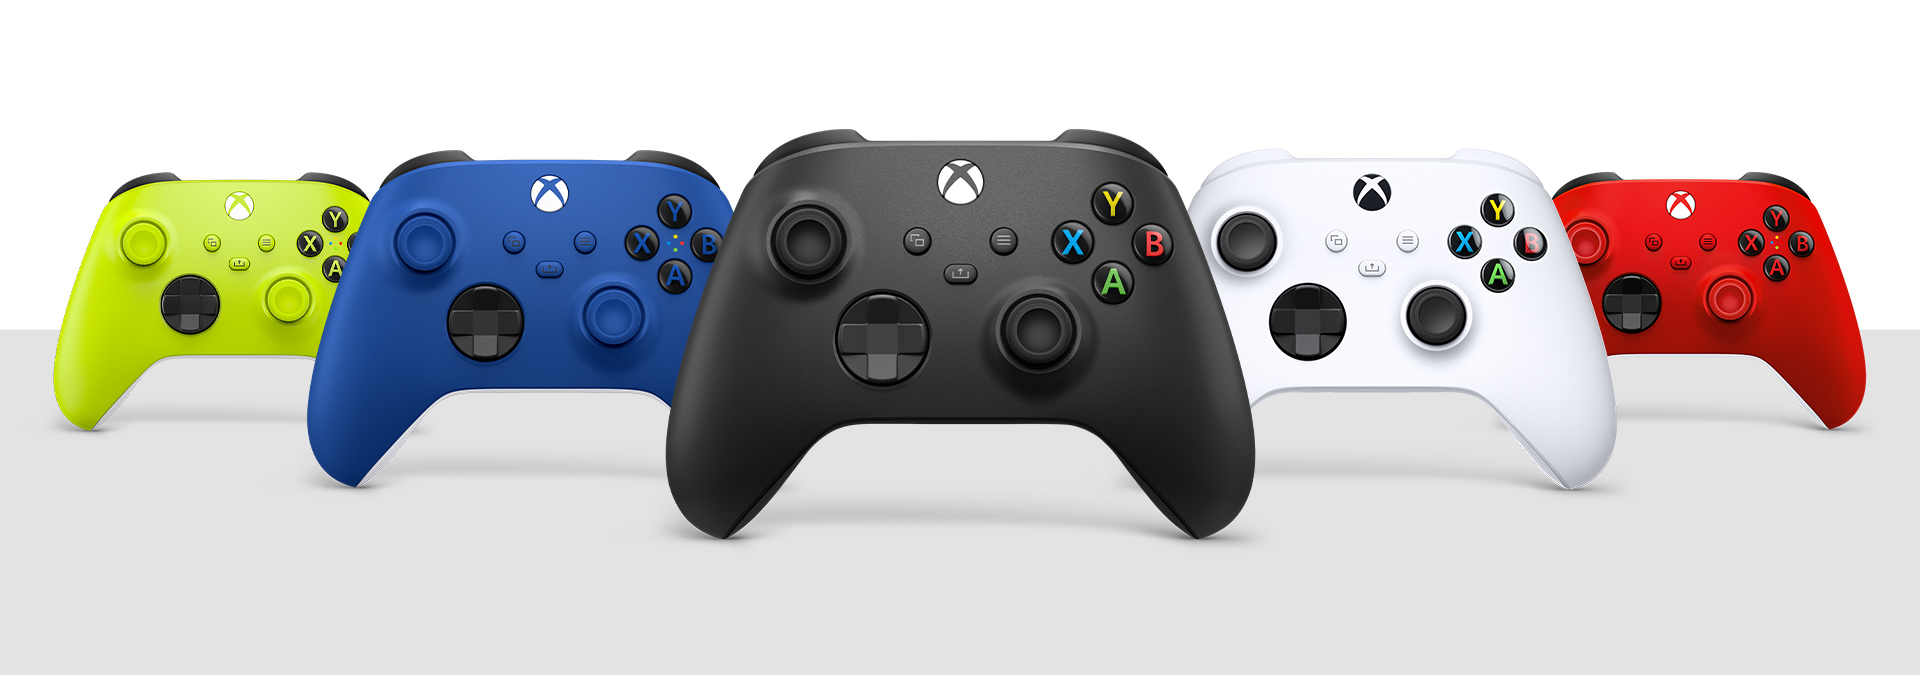 Xbox Wireless Controller Carbon Black, Robot White, Shock Blue, Pulse Red, and Electric Volt